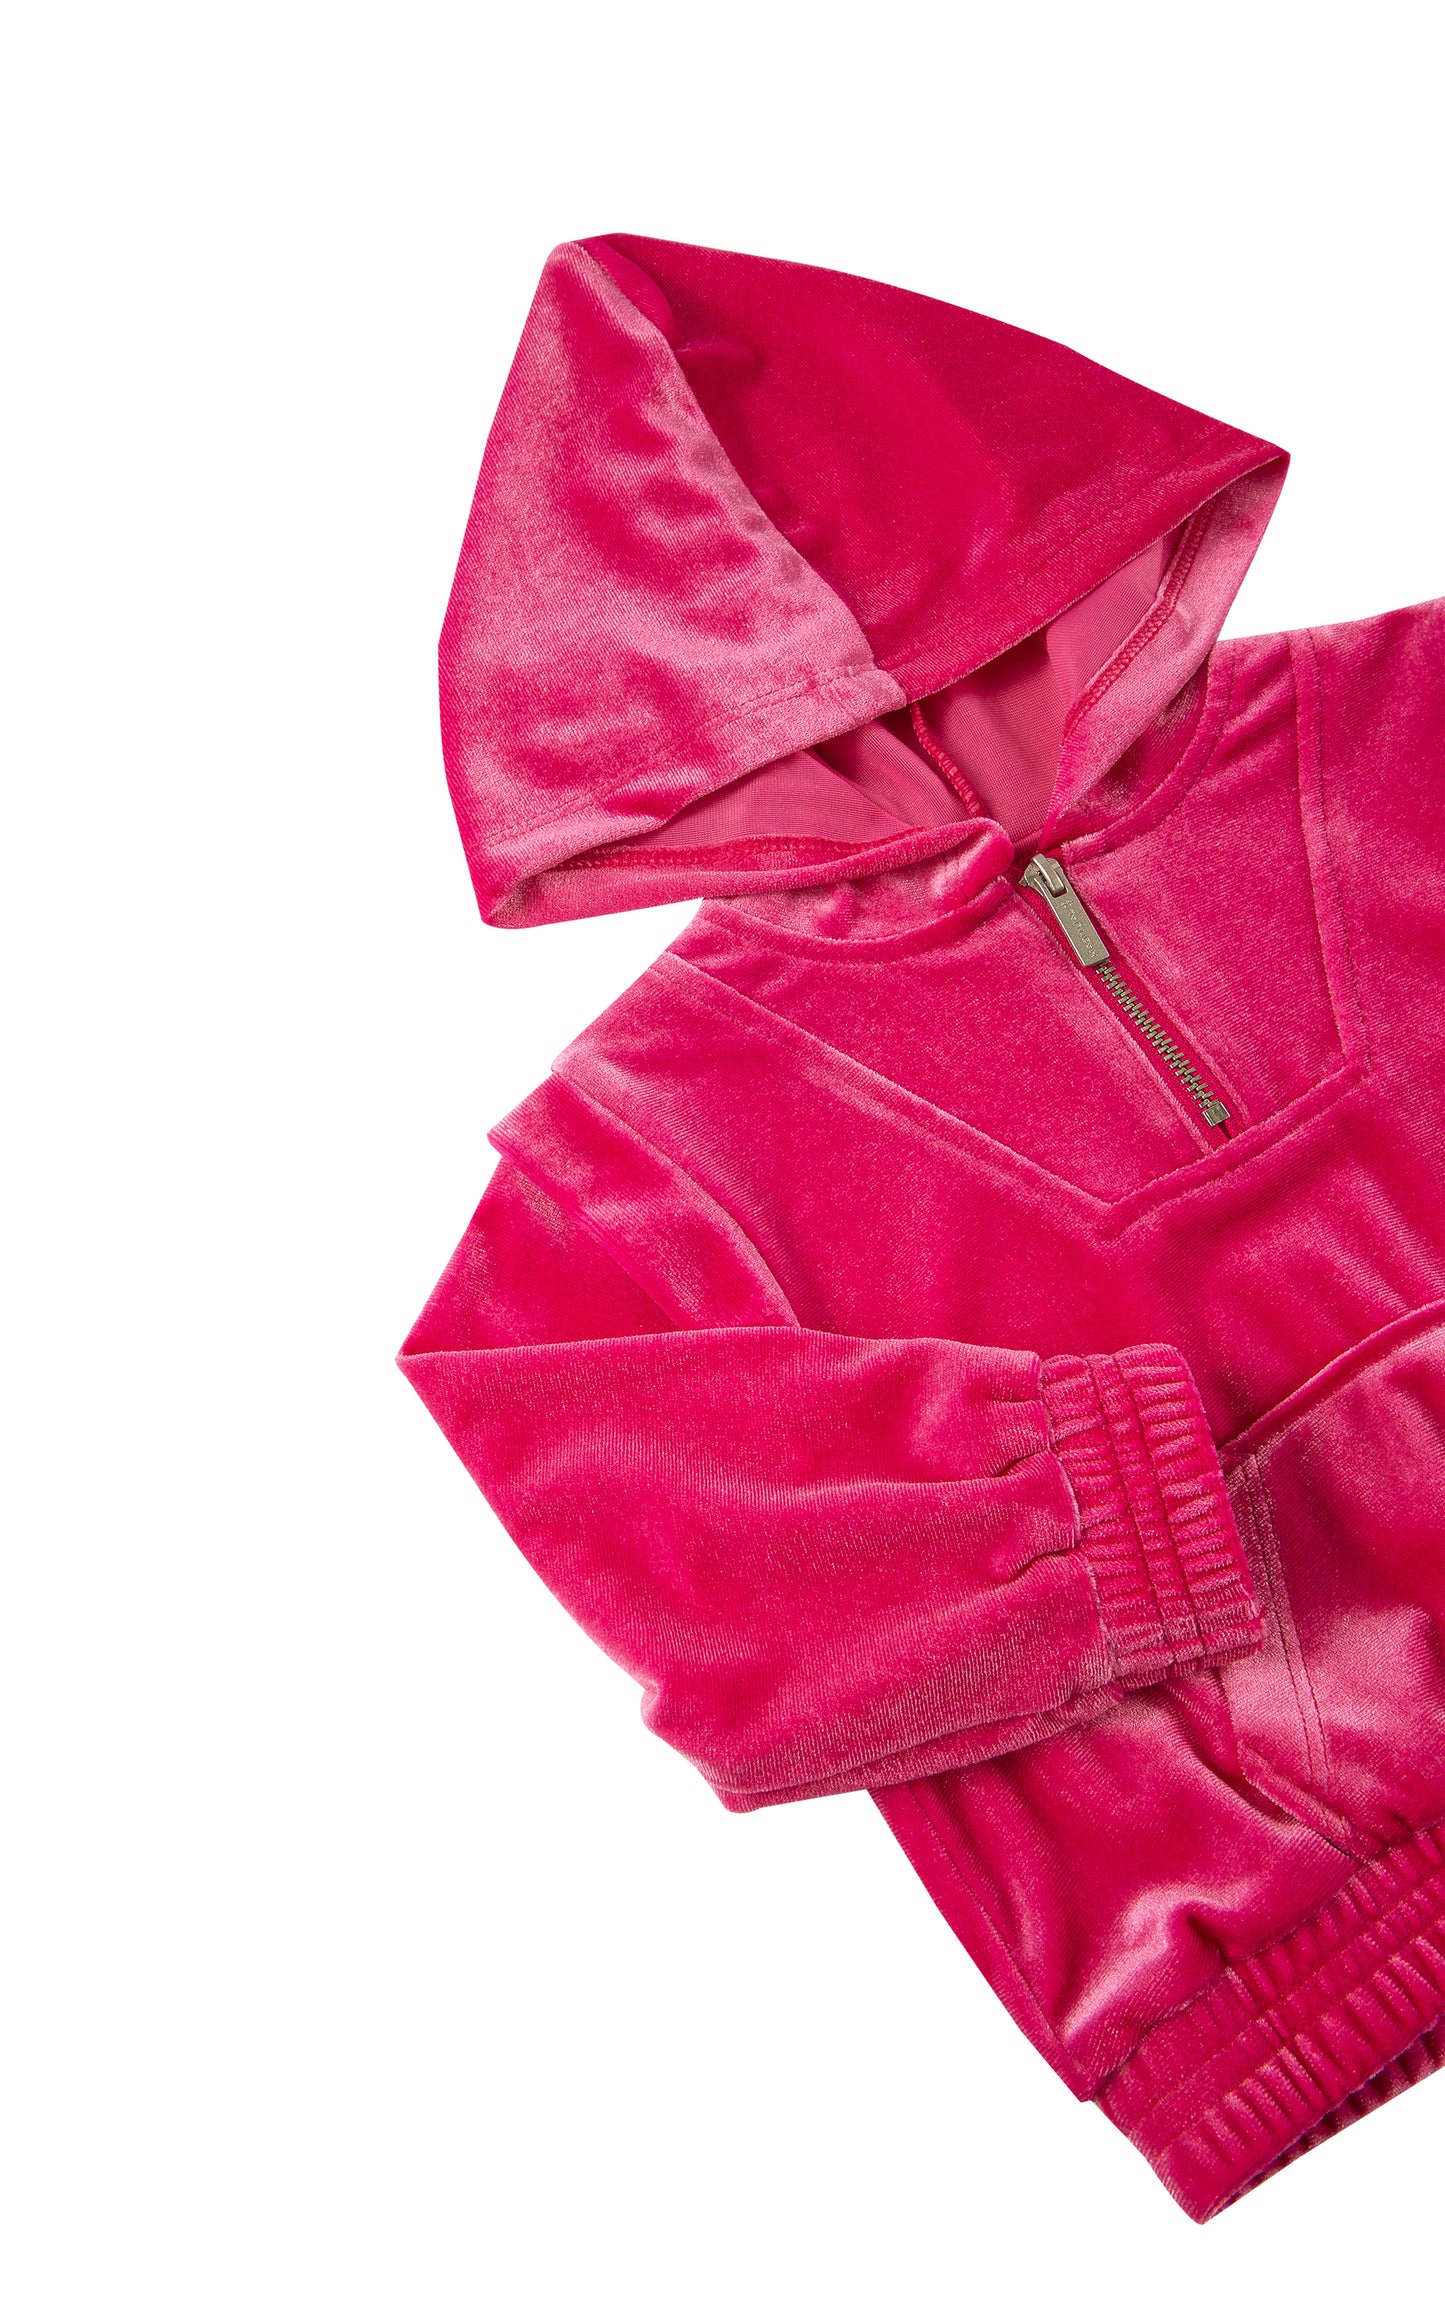 Detail view of a hot pink velour tracksuit hooded sweatshirt